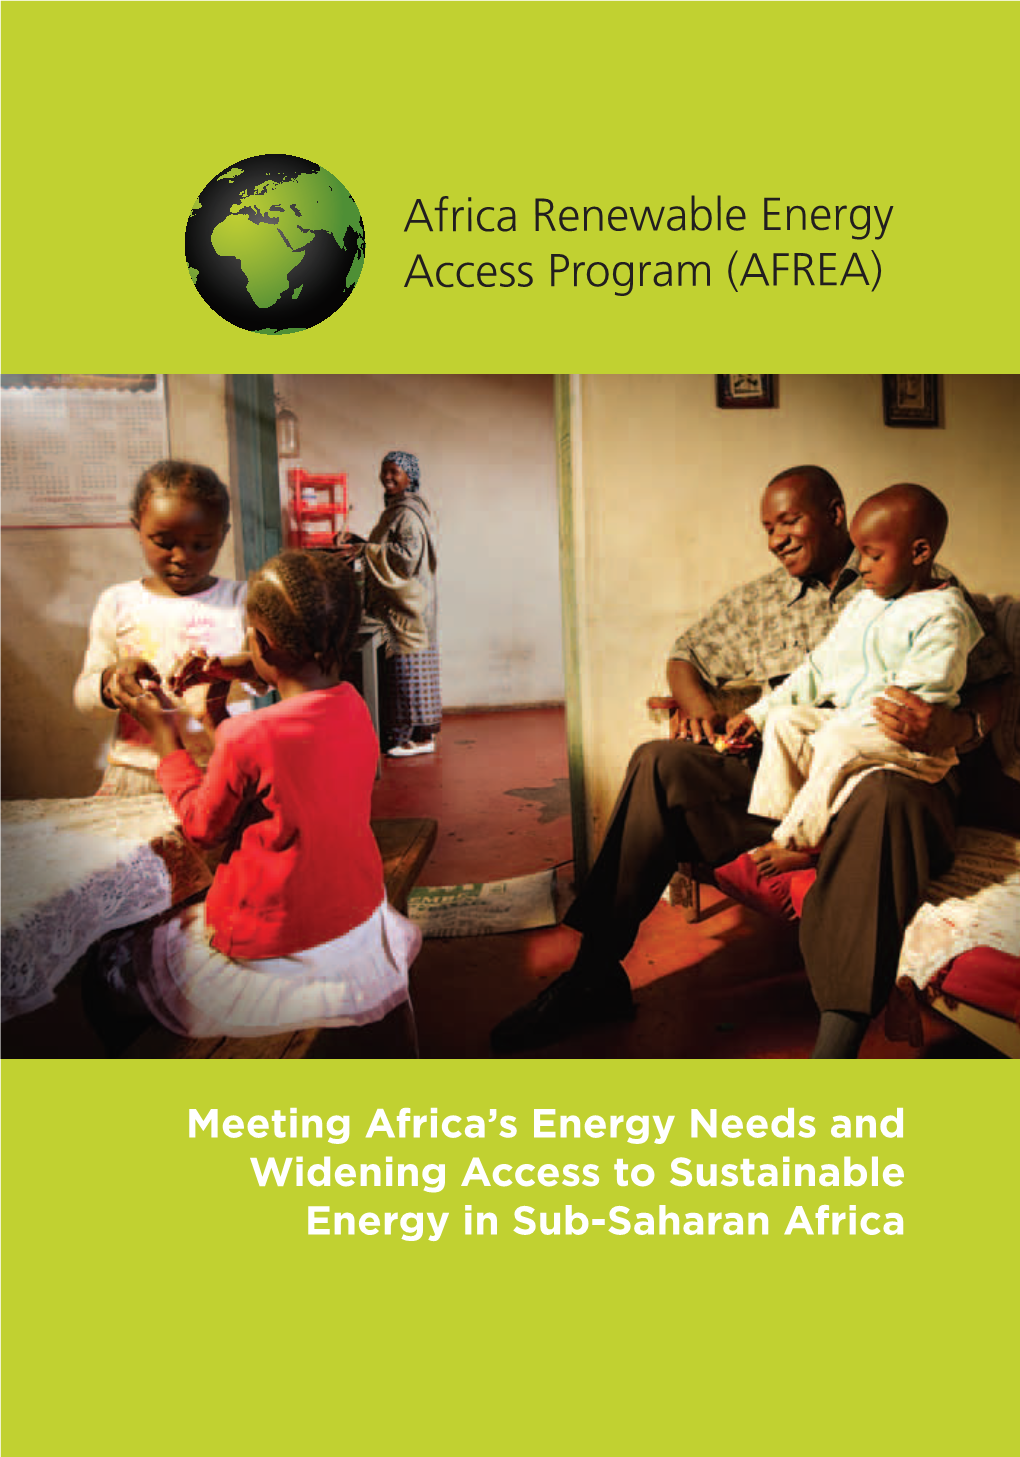 Meeting Africa's Energy Needs and Widening Access to Sustainable